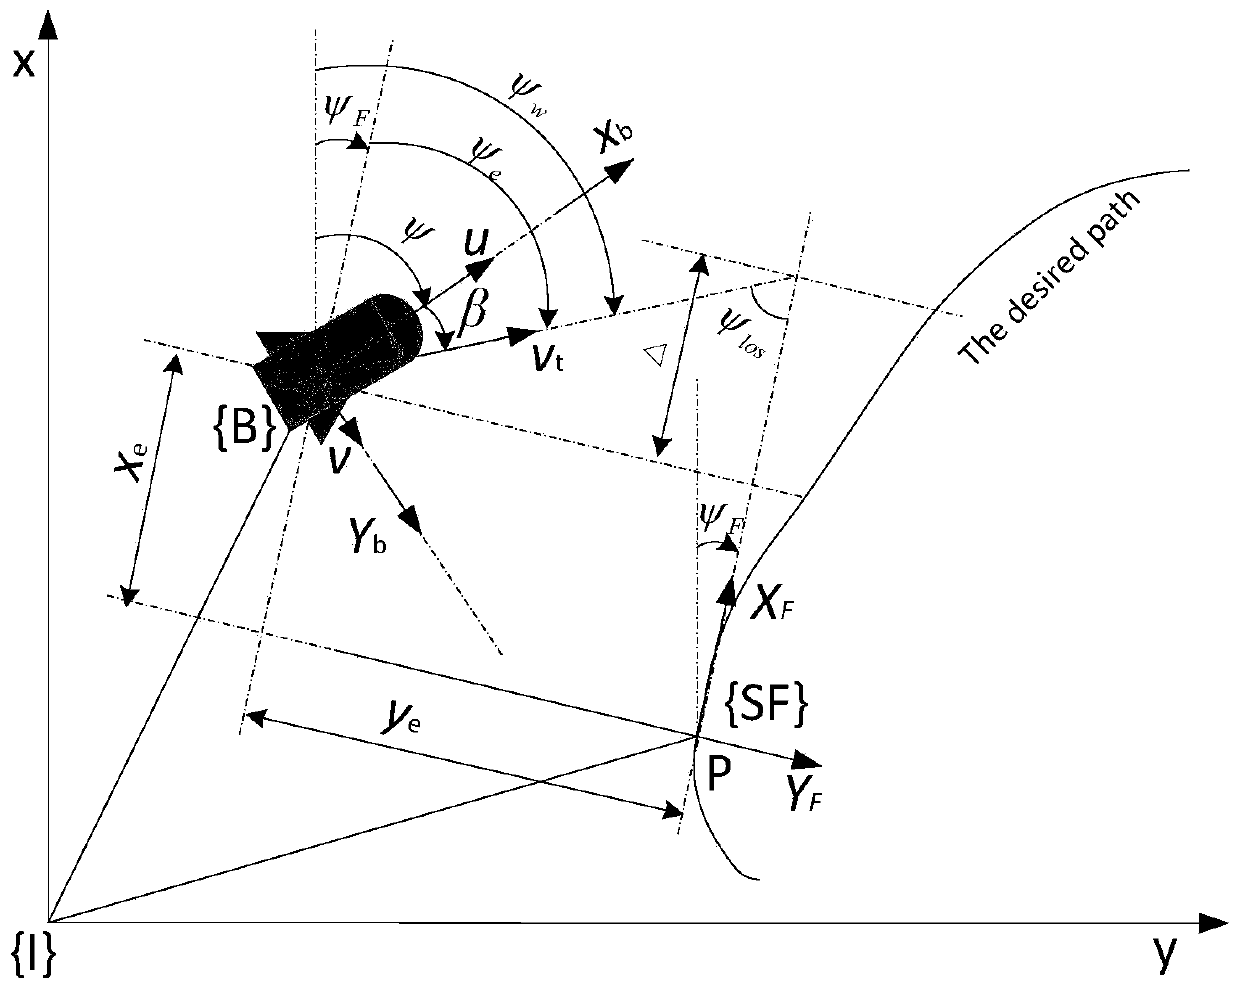 High-precision nonlinear path-following control method for underactuated marine vehicles